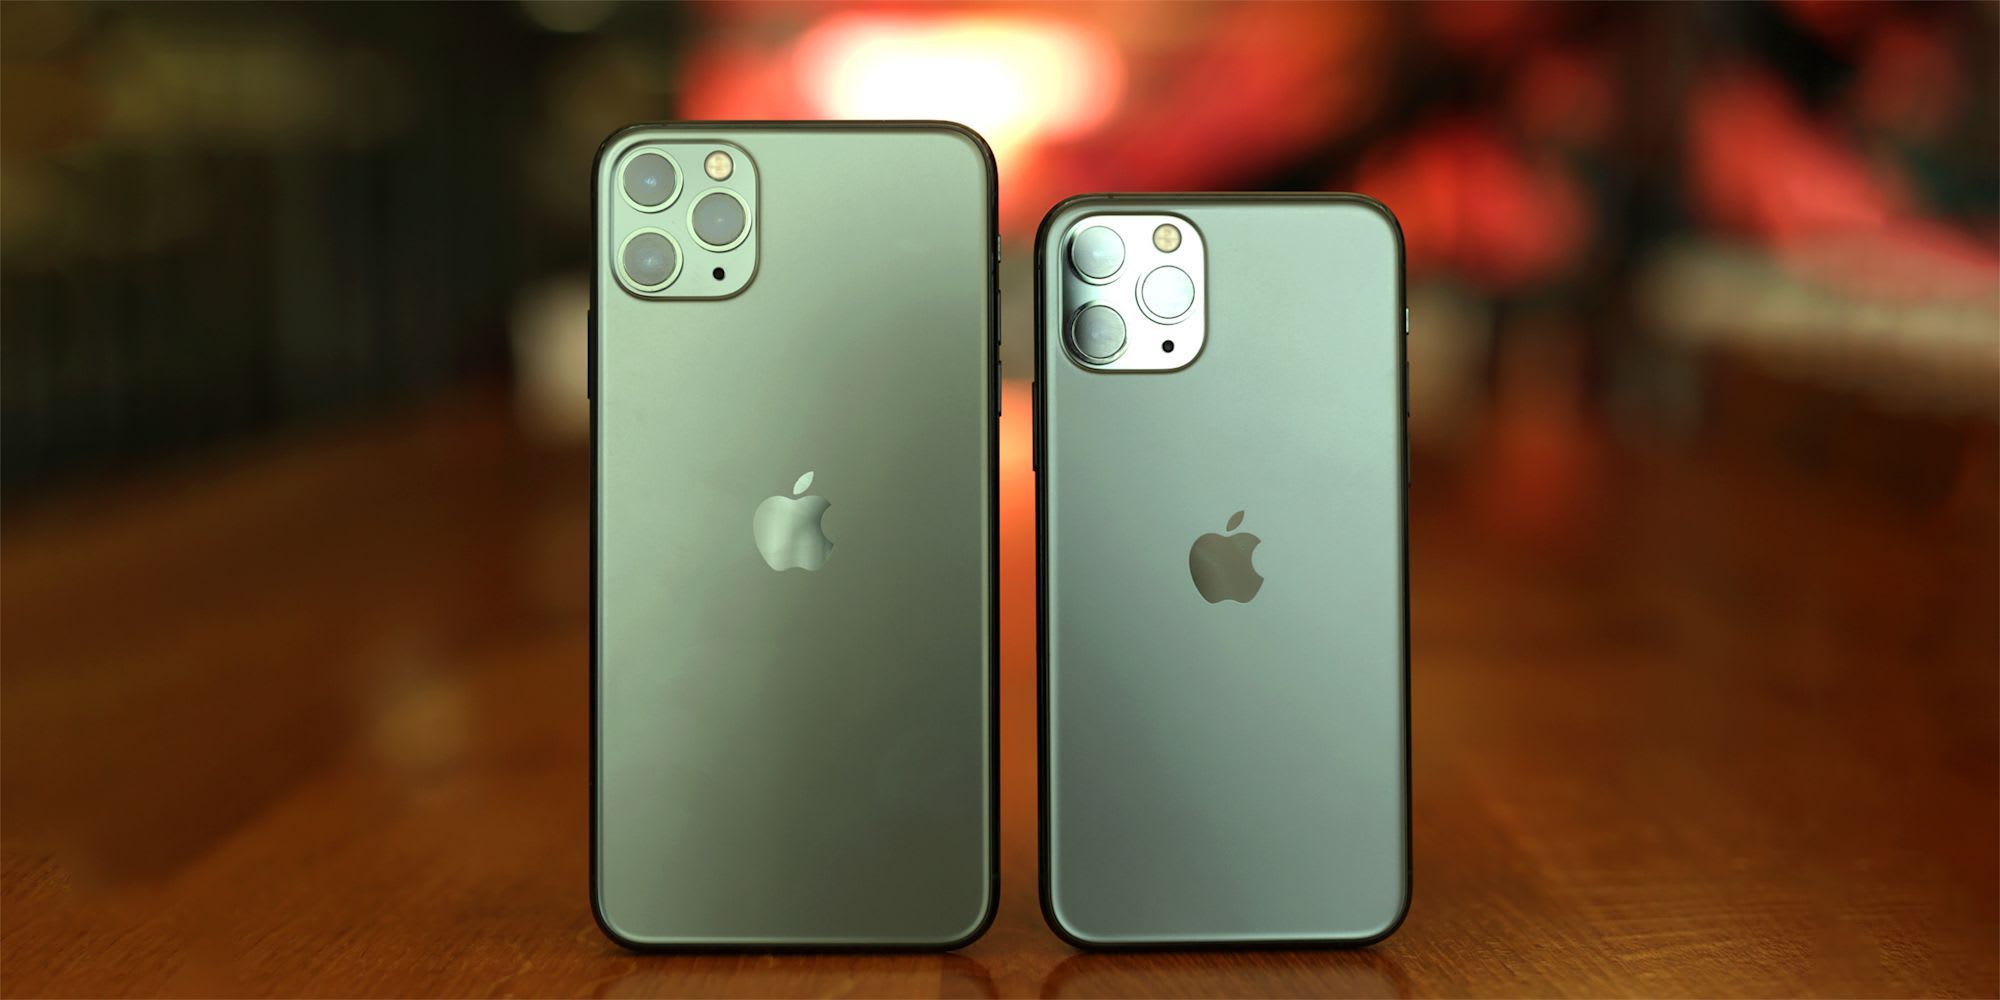 Apple iPhone 11 Pro Max and 11 Pro